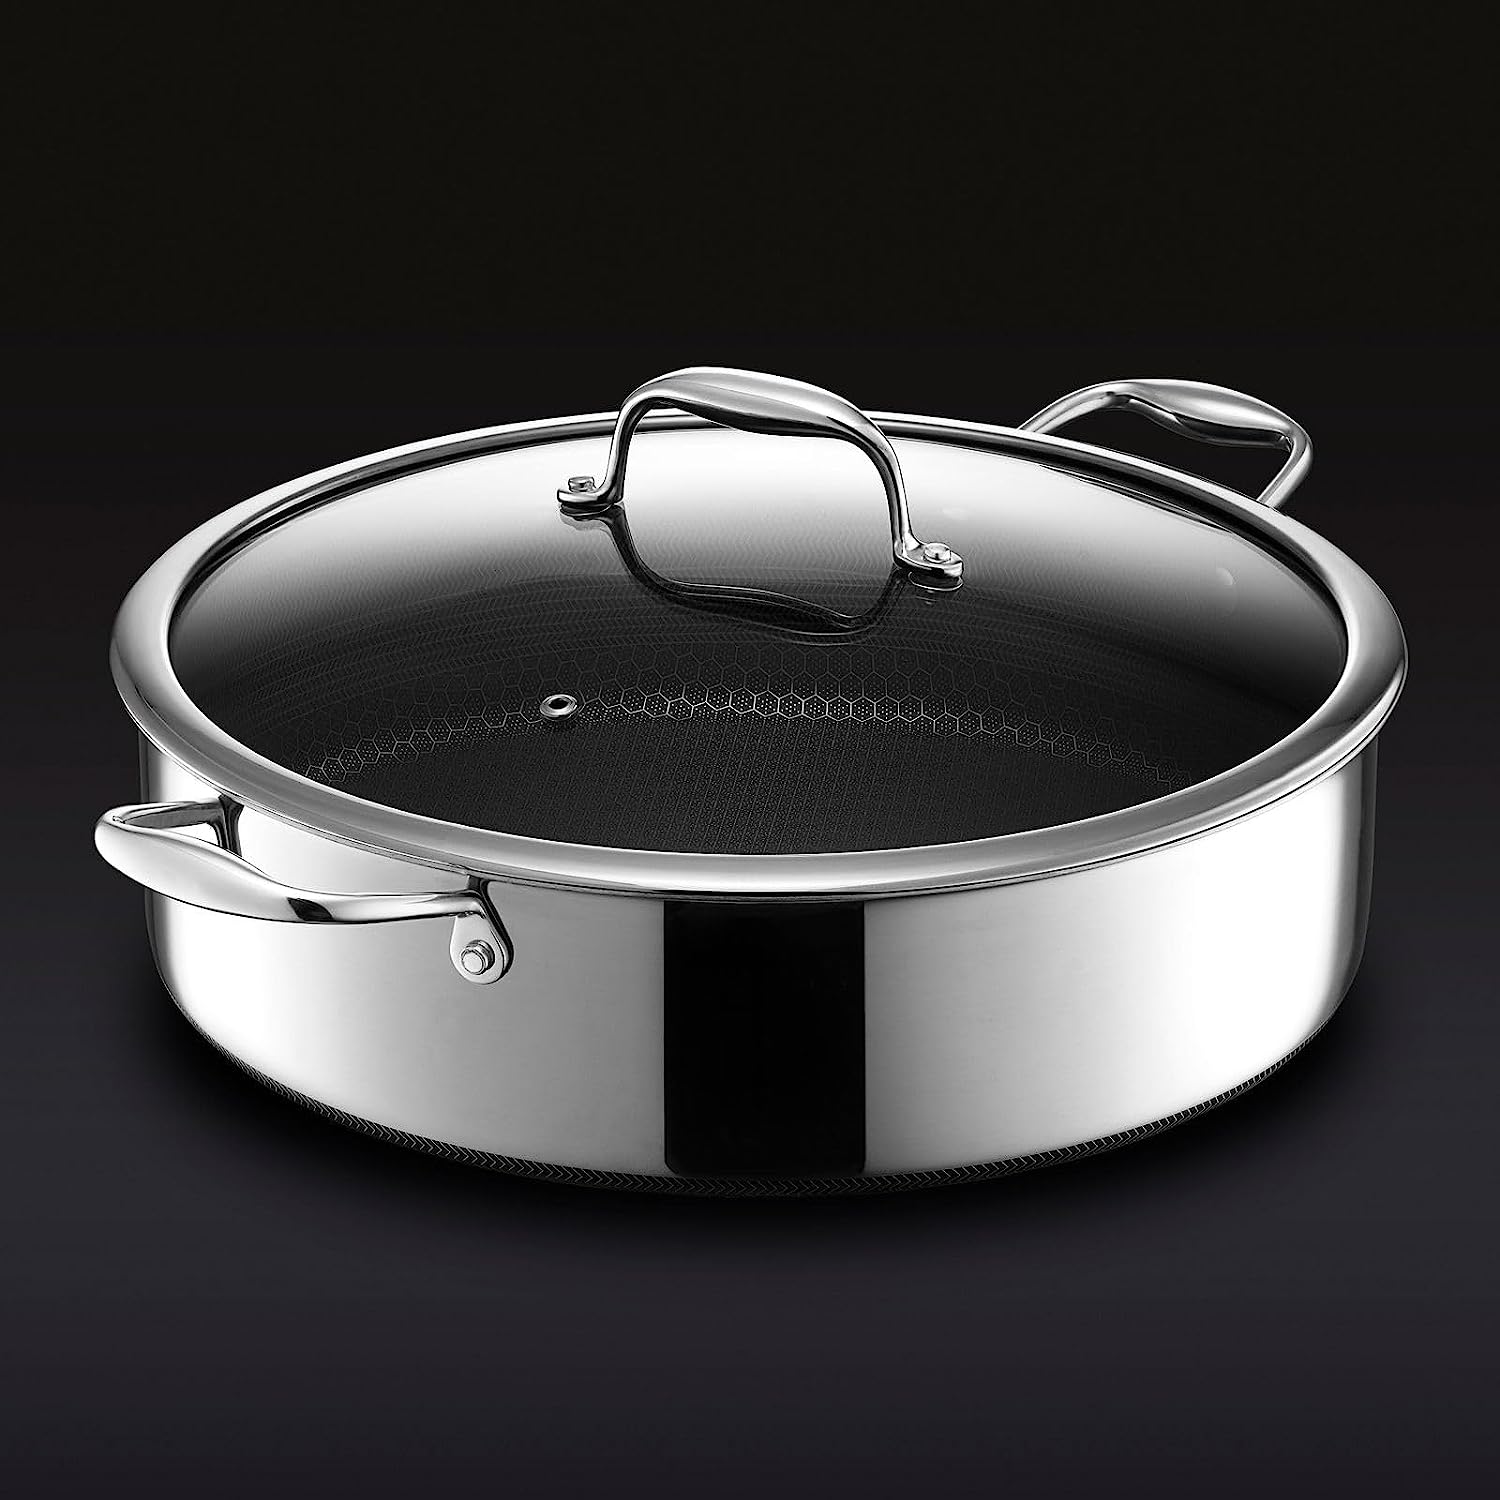 https://bigbigmart.com/wp-content/uploads/2023/09/HexClad-7-Quart-Hybrid-Saute-Pan-Nonstick-Chicken-Fryer-Dishwasher-and-Oven-Friendly-Compatible-with-All-Cooktops2.jpg